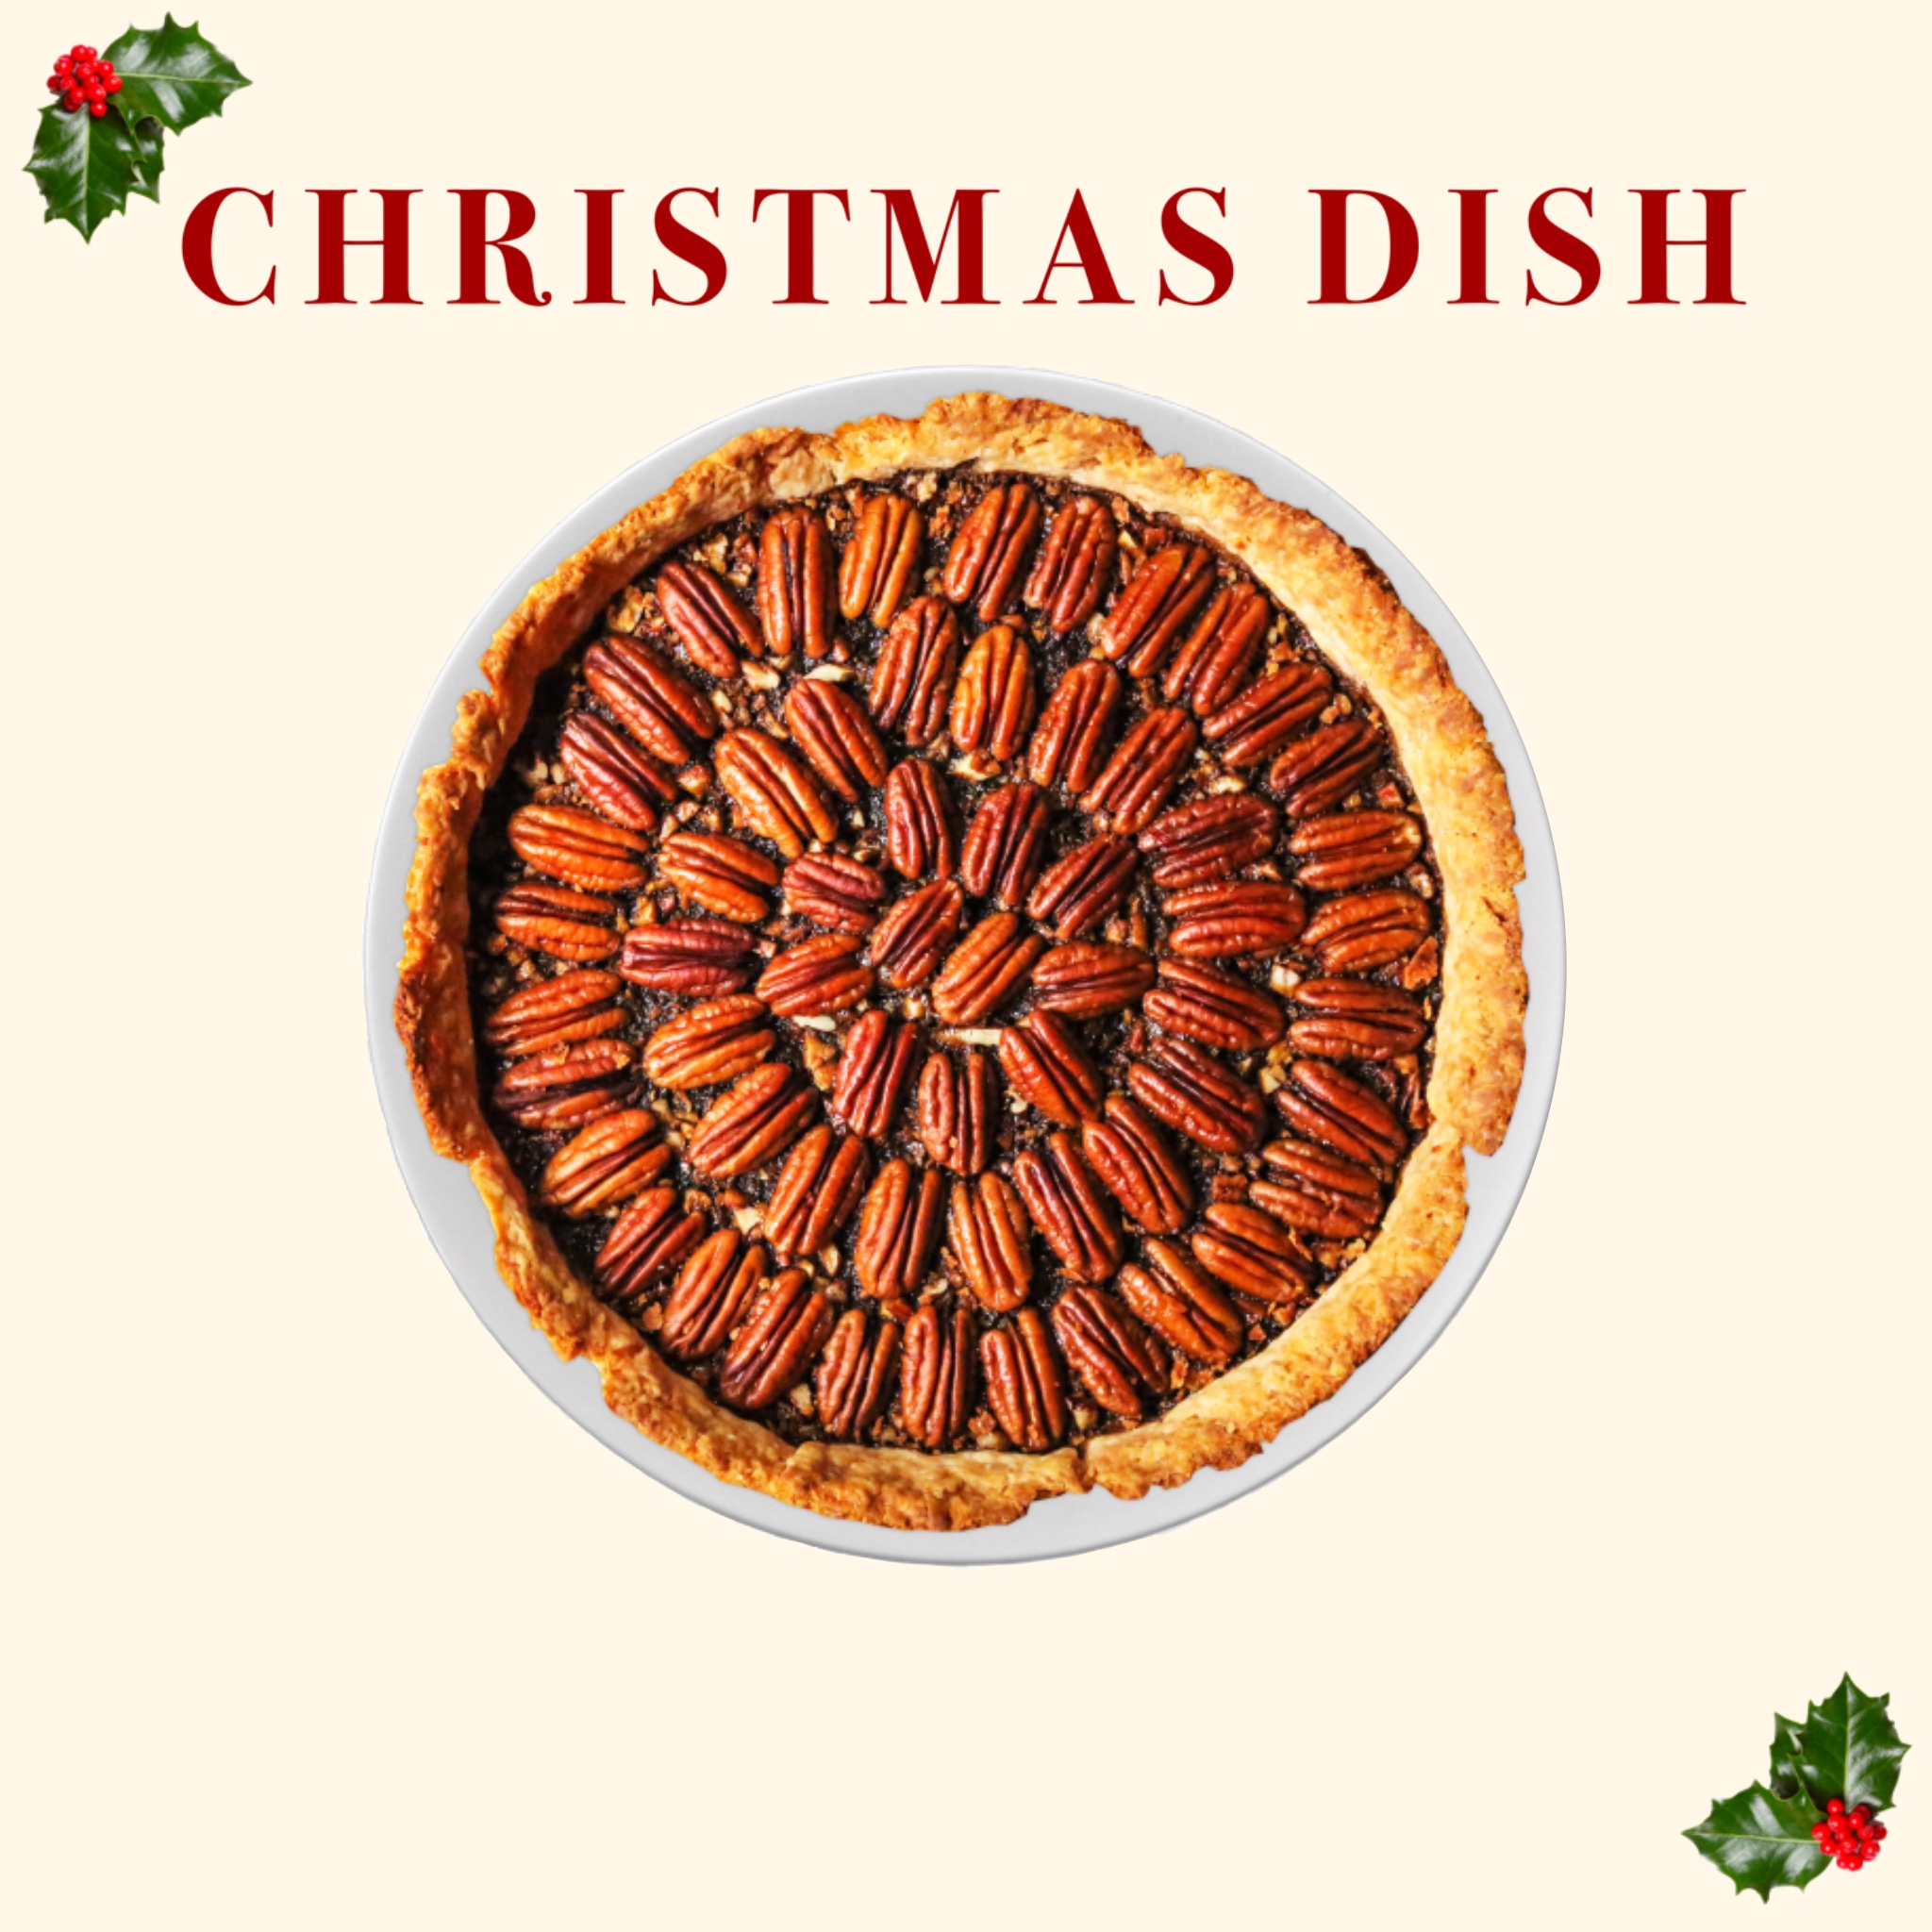 picture of a pecan pie with holly and berries and the text Christmas Dish